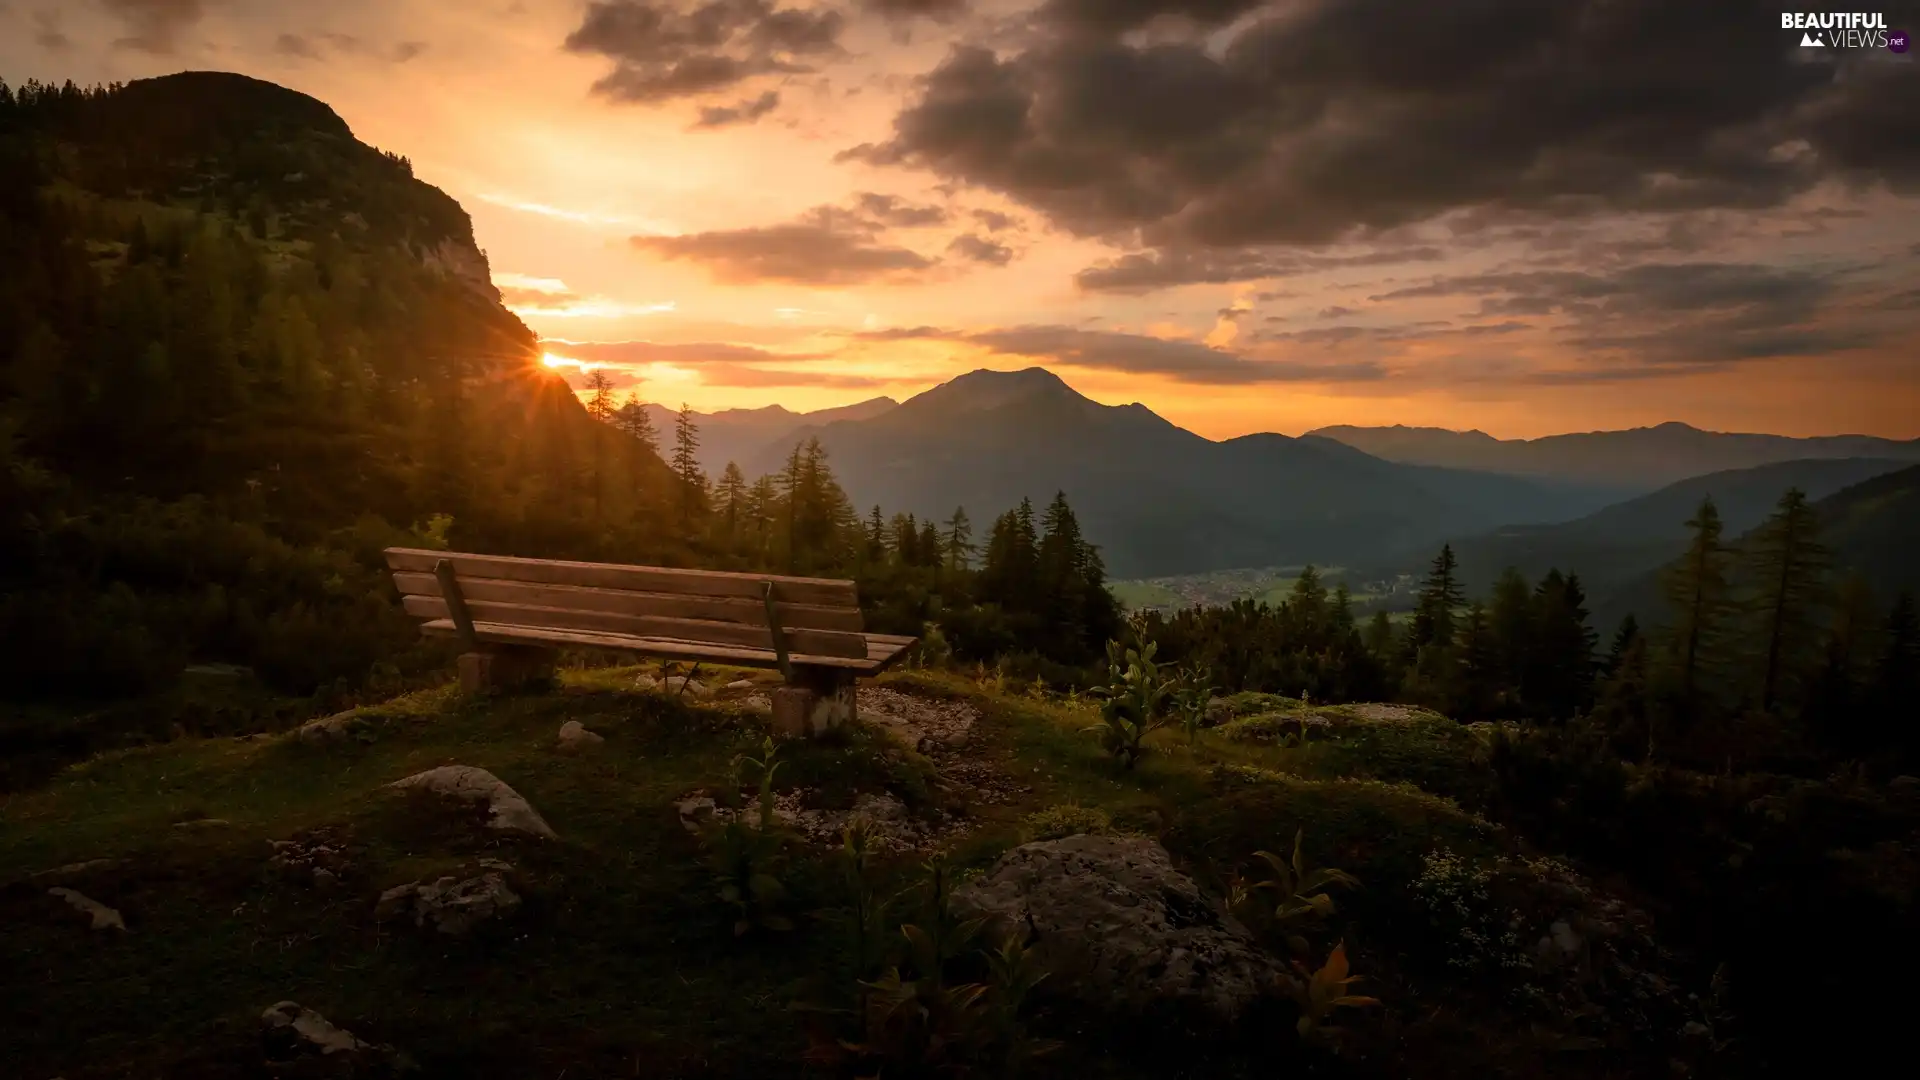 Tirol, Austria, Reutte District, Alps Mountains, Great Sunsets, clouds, trees, viewes, Bench